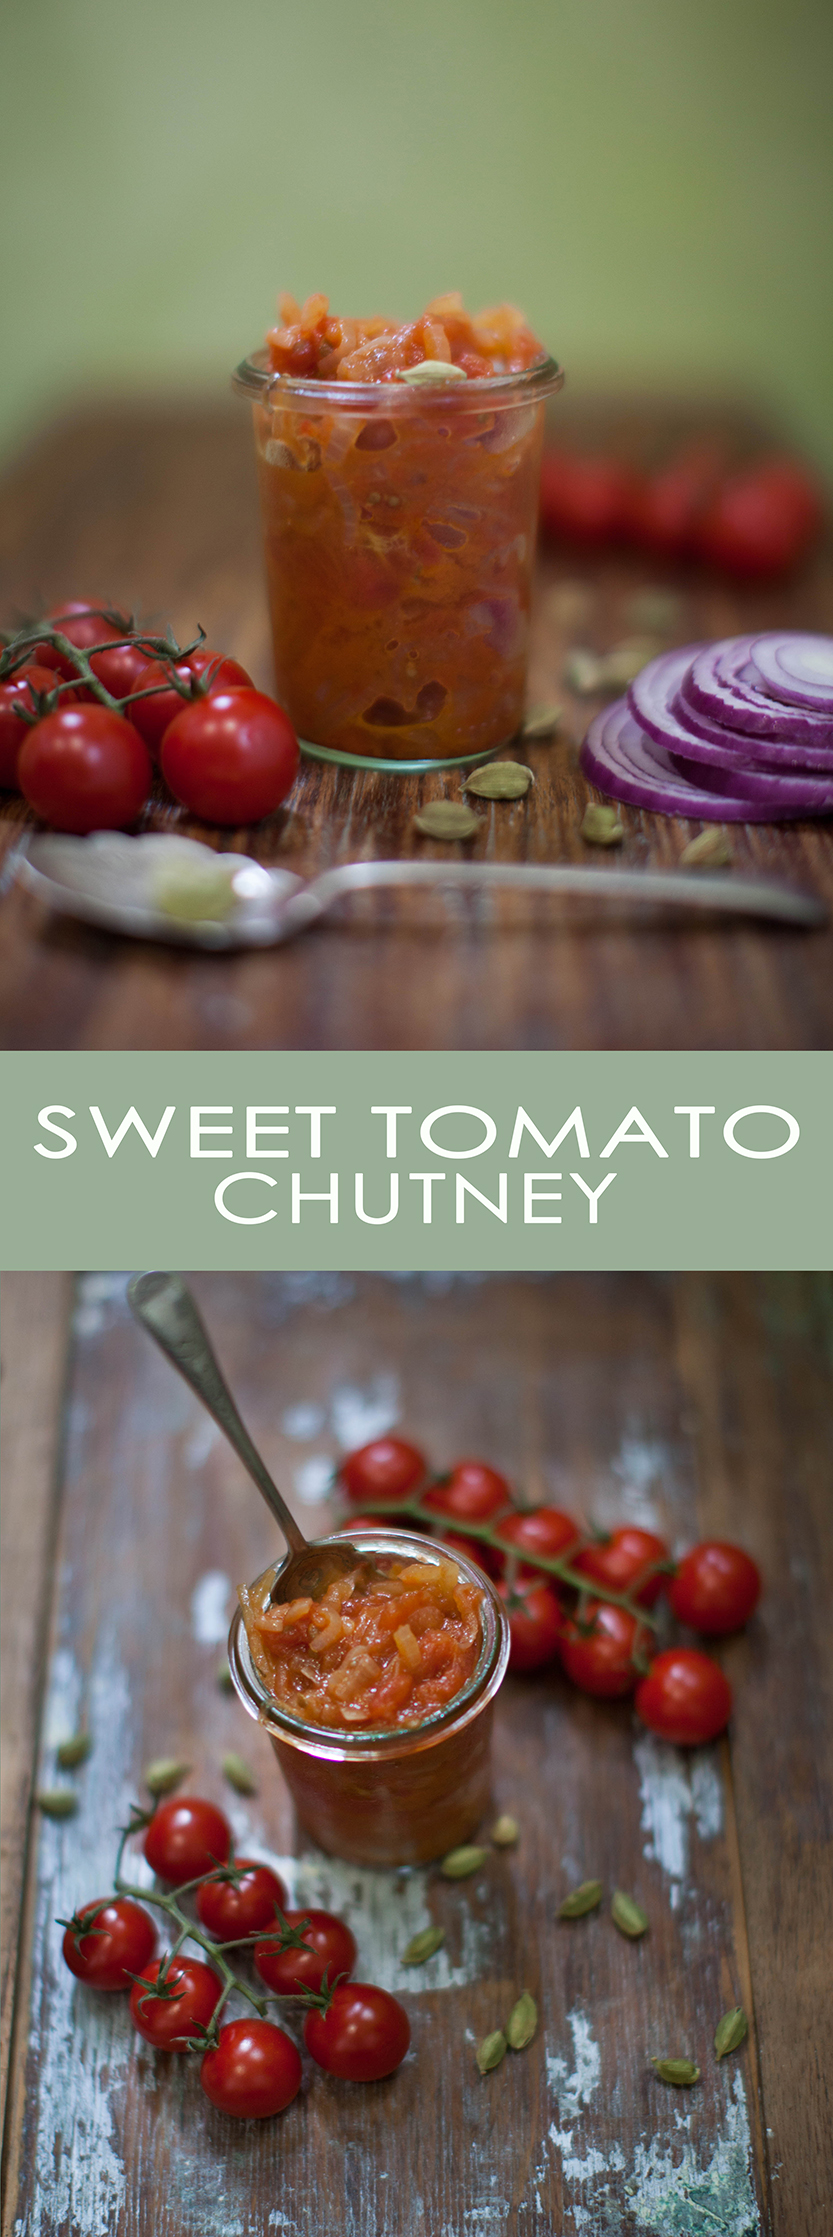 Sweet Tomato Chutney - delicious with so many dishes